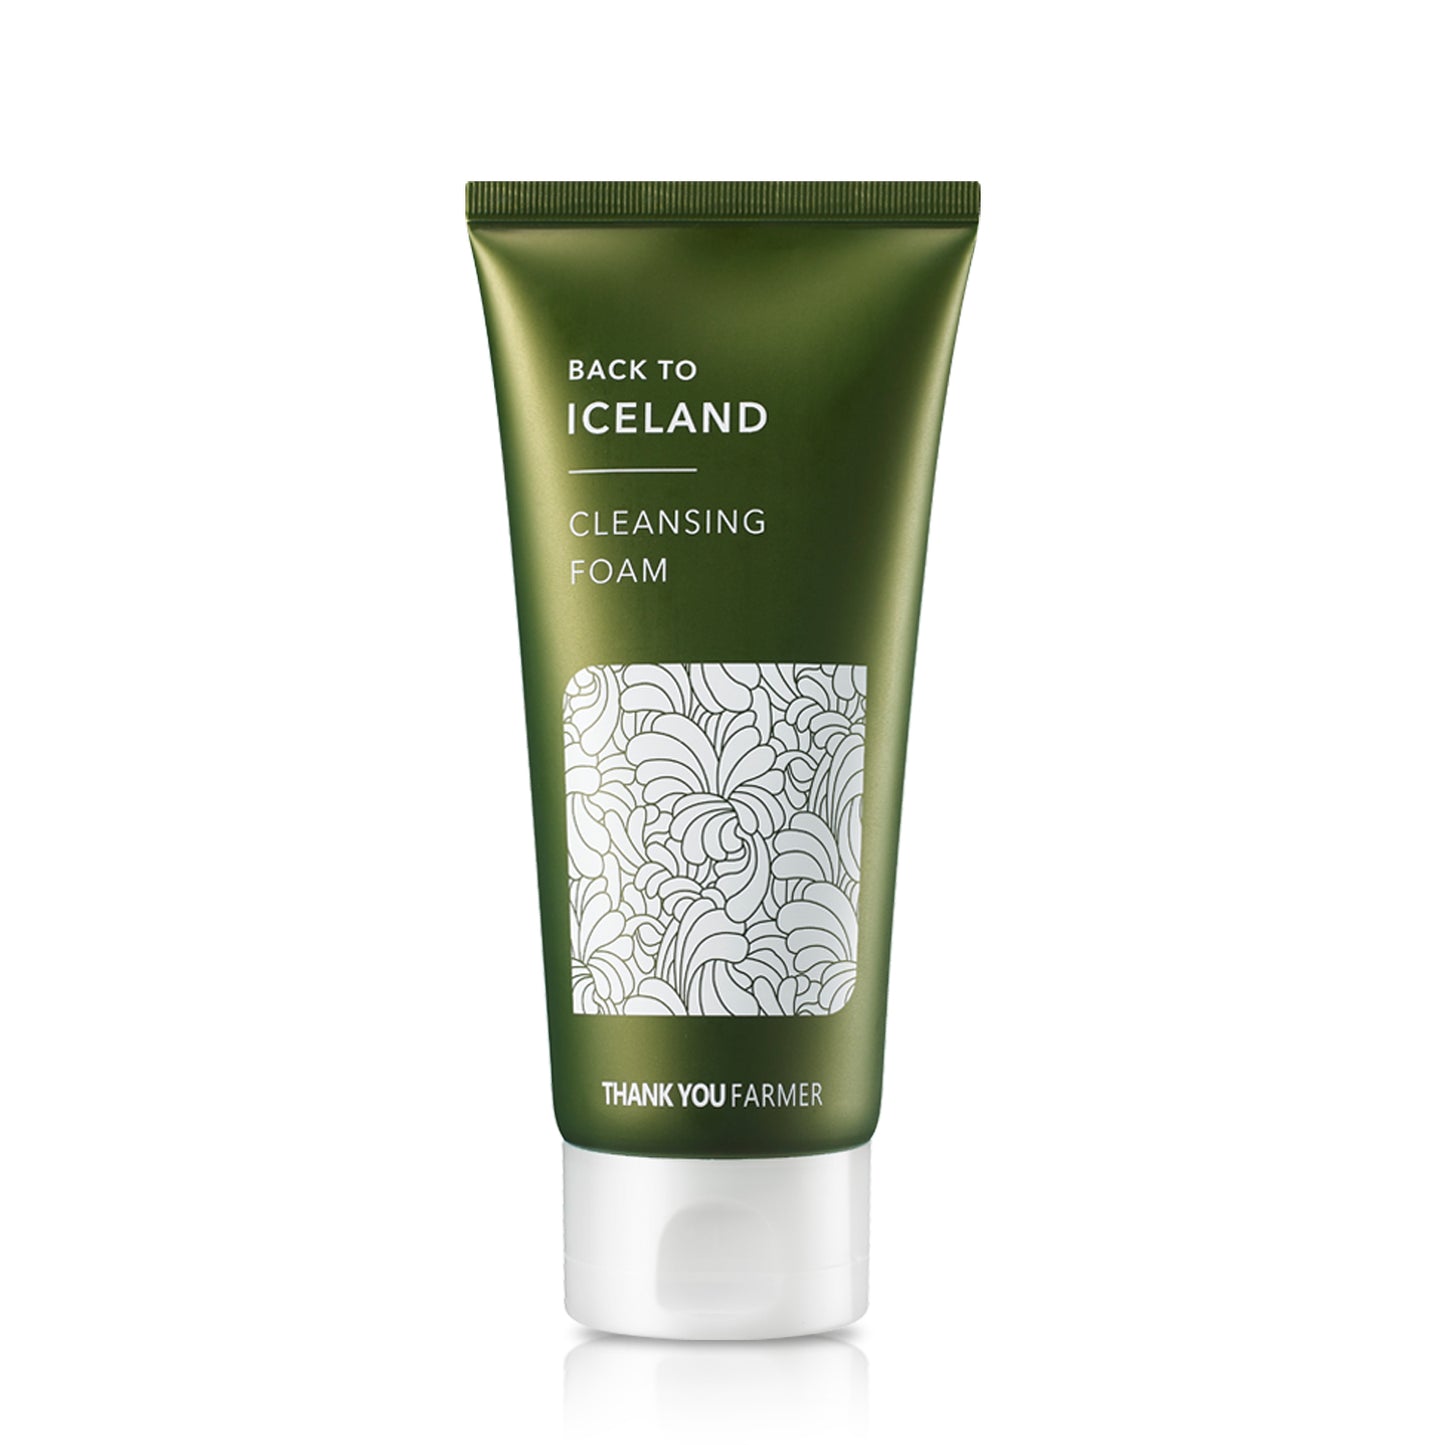 Back to Iceland cleansing foam - (120ml)